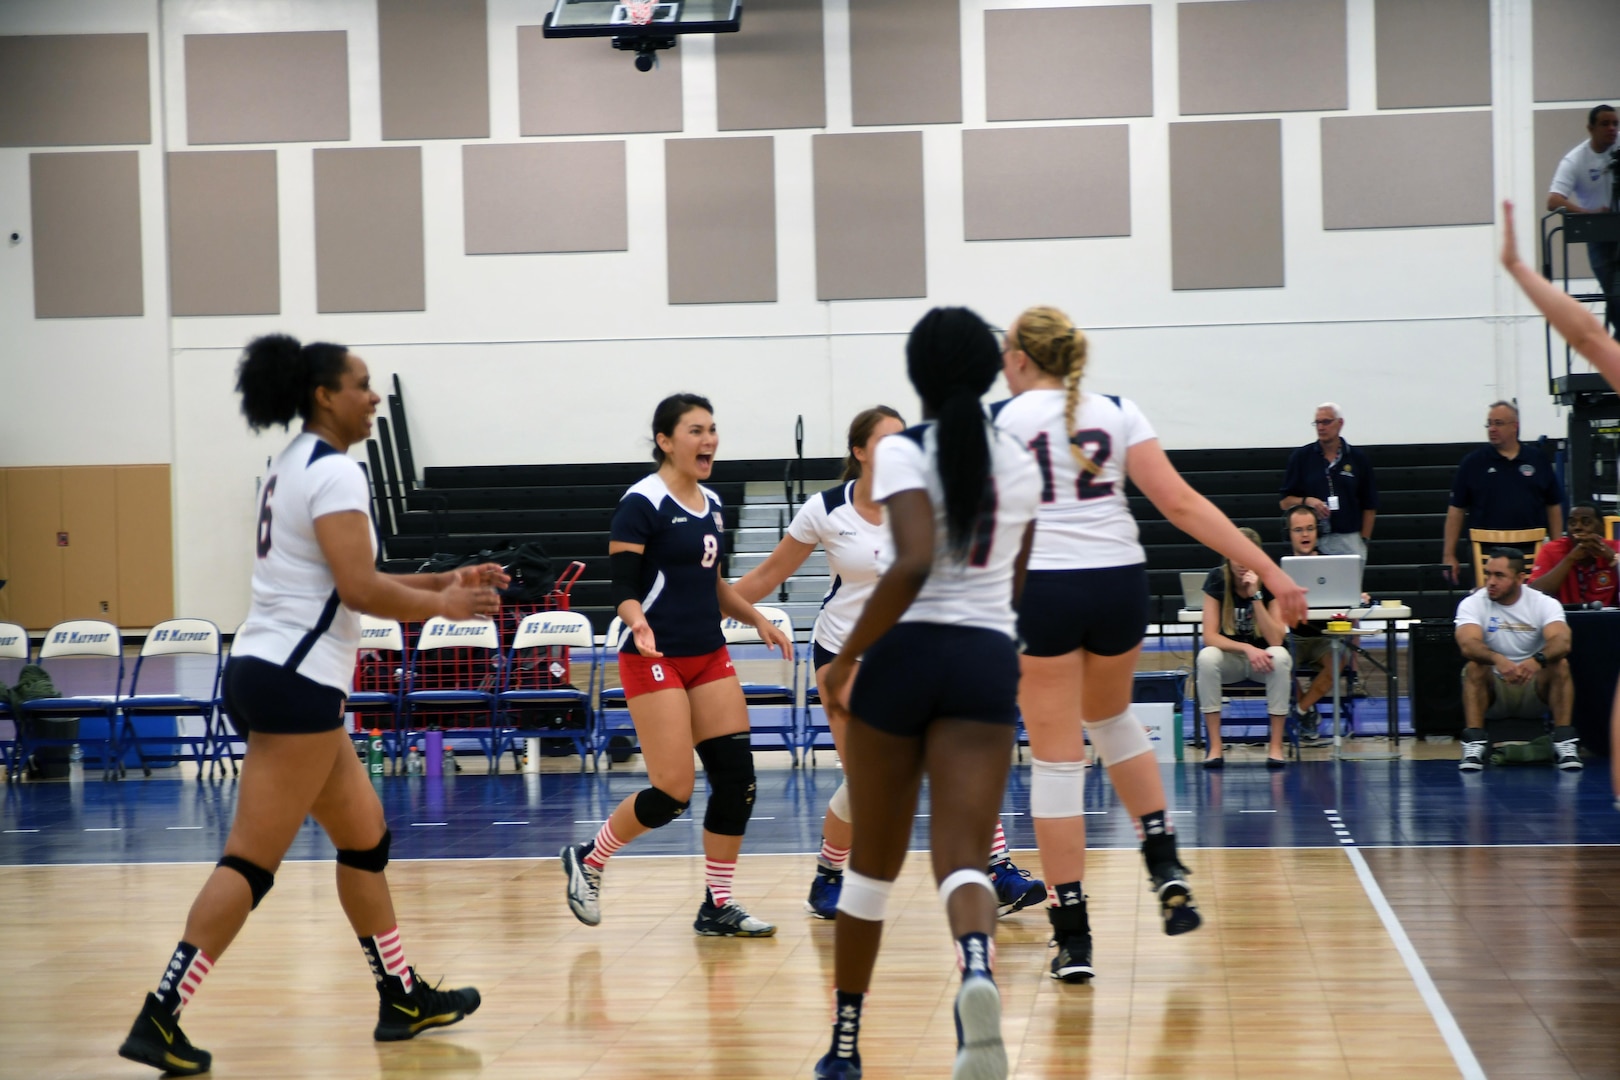 U.S. Armed Forces Women's Volleyball team celebrate a point against China in match 1 of the 18th Conseil International du Sport Militaire (CISM) World Women's Military Volleyball Championship at Naval Station Mayport, Florida on 4 June 2017. Mayport is hosting the CISM Championship from 2-11 June.  Finals are on 9 June.